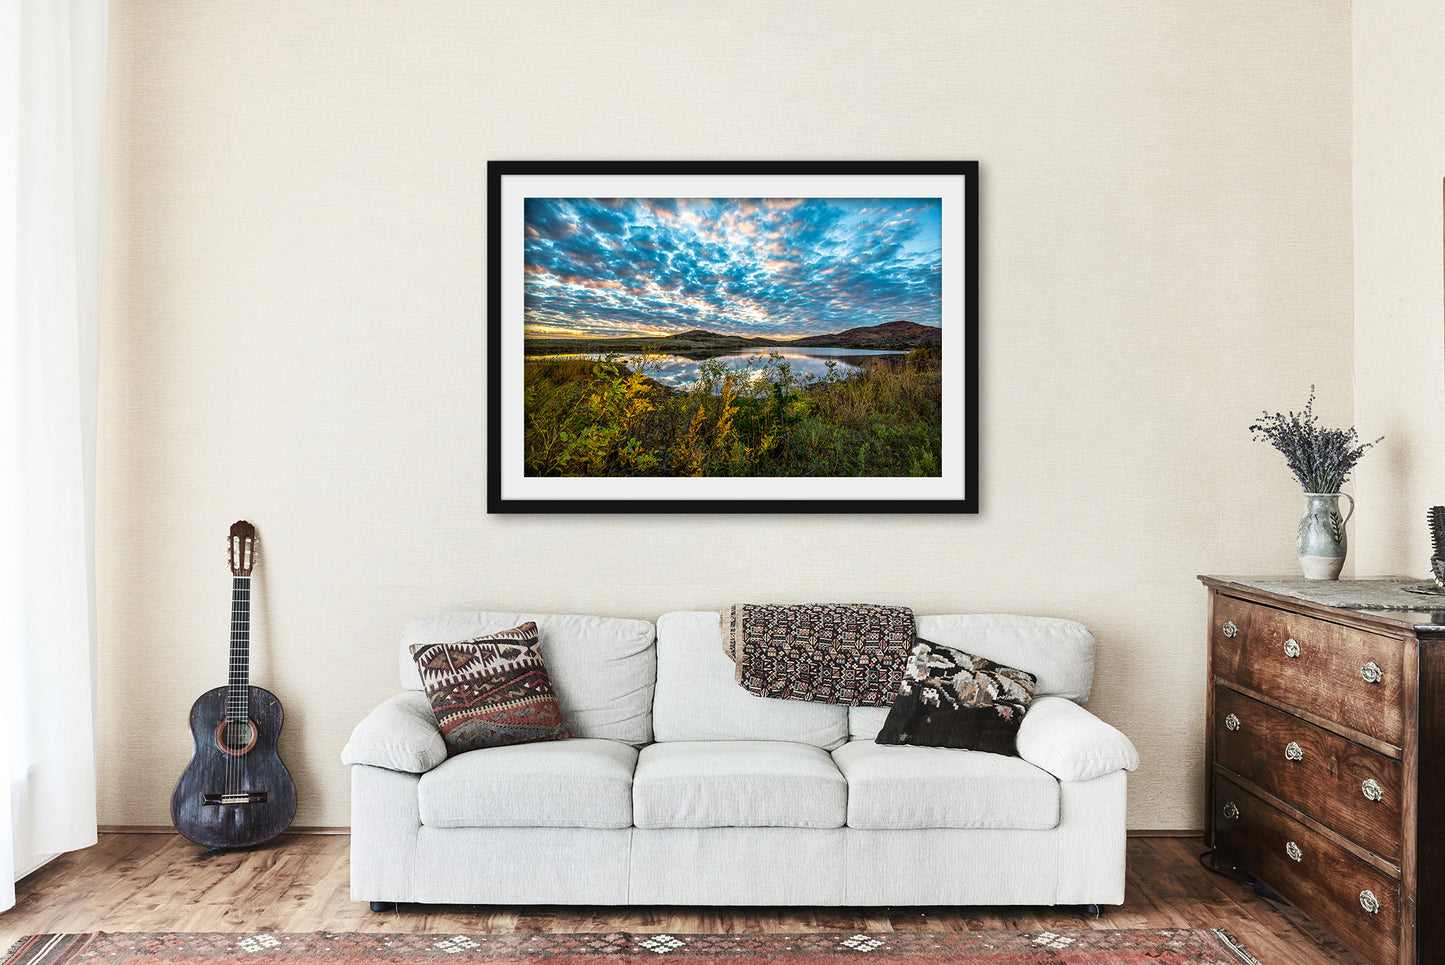 Framed Print - Ready to Hang Wall Art of Scenic Sky Over Wichita Mountains on Autumn Evening in Oklahoma - Great Plains Landscape Decor